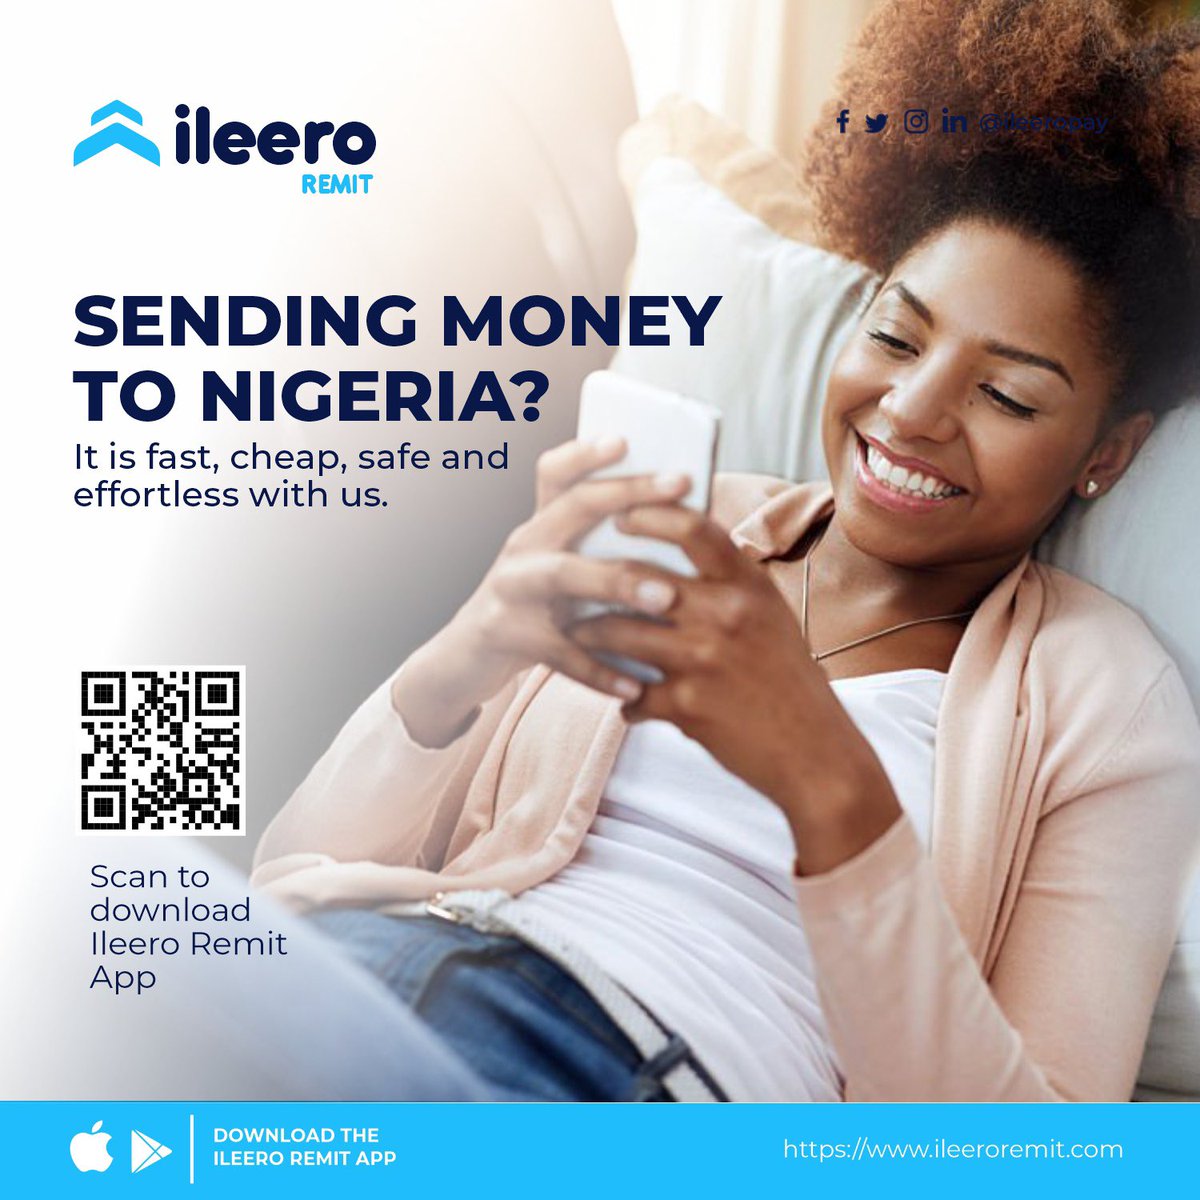 Need to send money to Nigeria with no hassle? 

Ileero Remit got you anytime any day. 

#sendmoneytonigeria #nigeriansintheuk #nigeria #nigerians #nigeriansinlondon